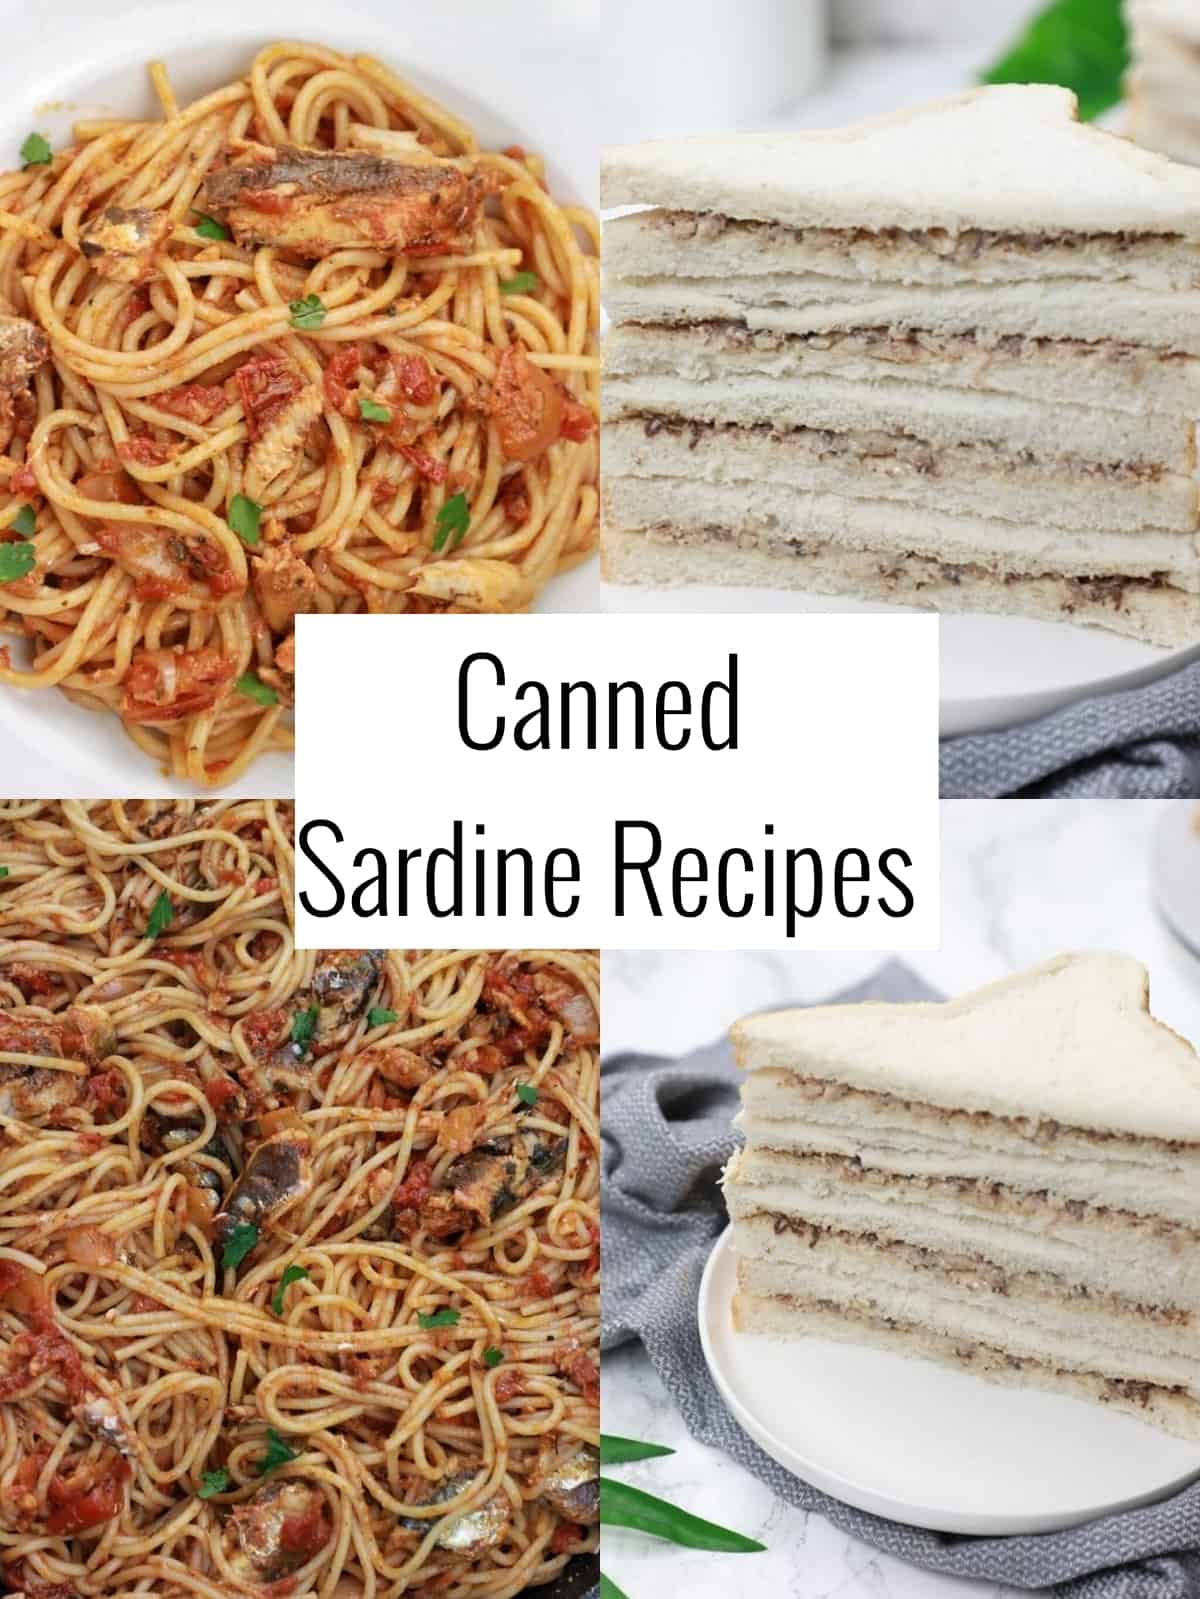 canned sardine recipes picture collage.